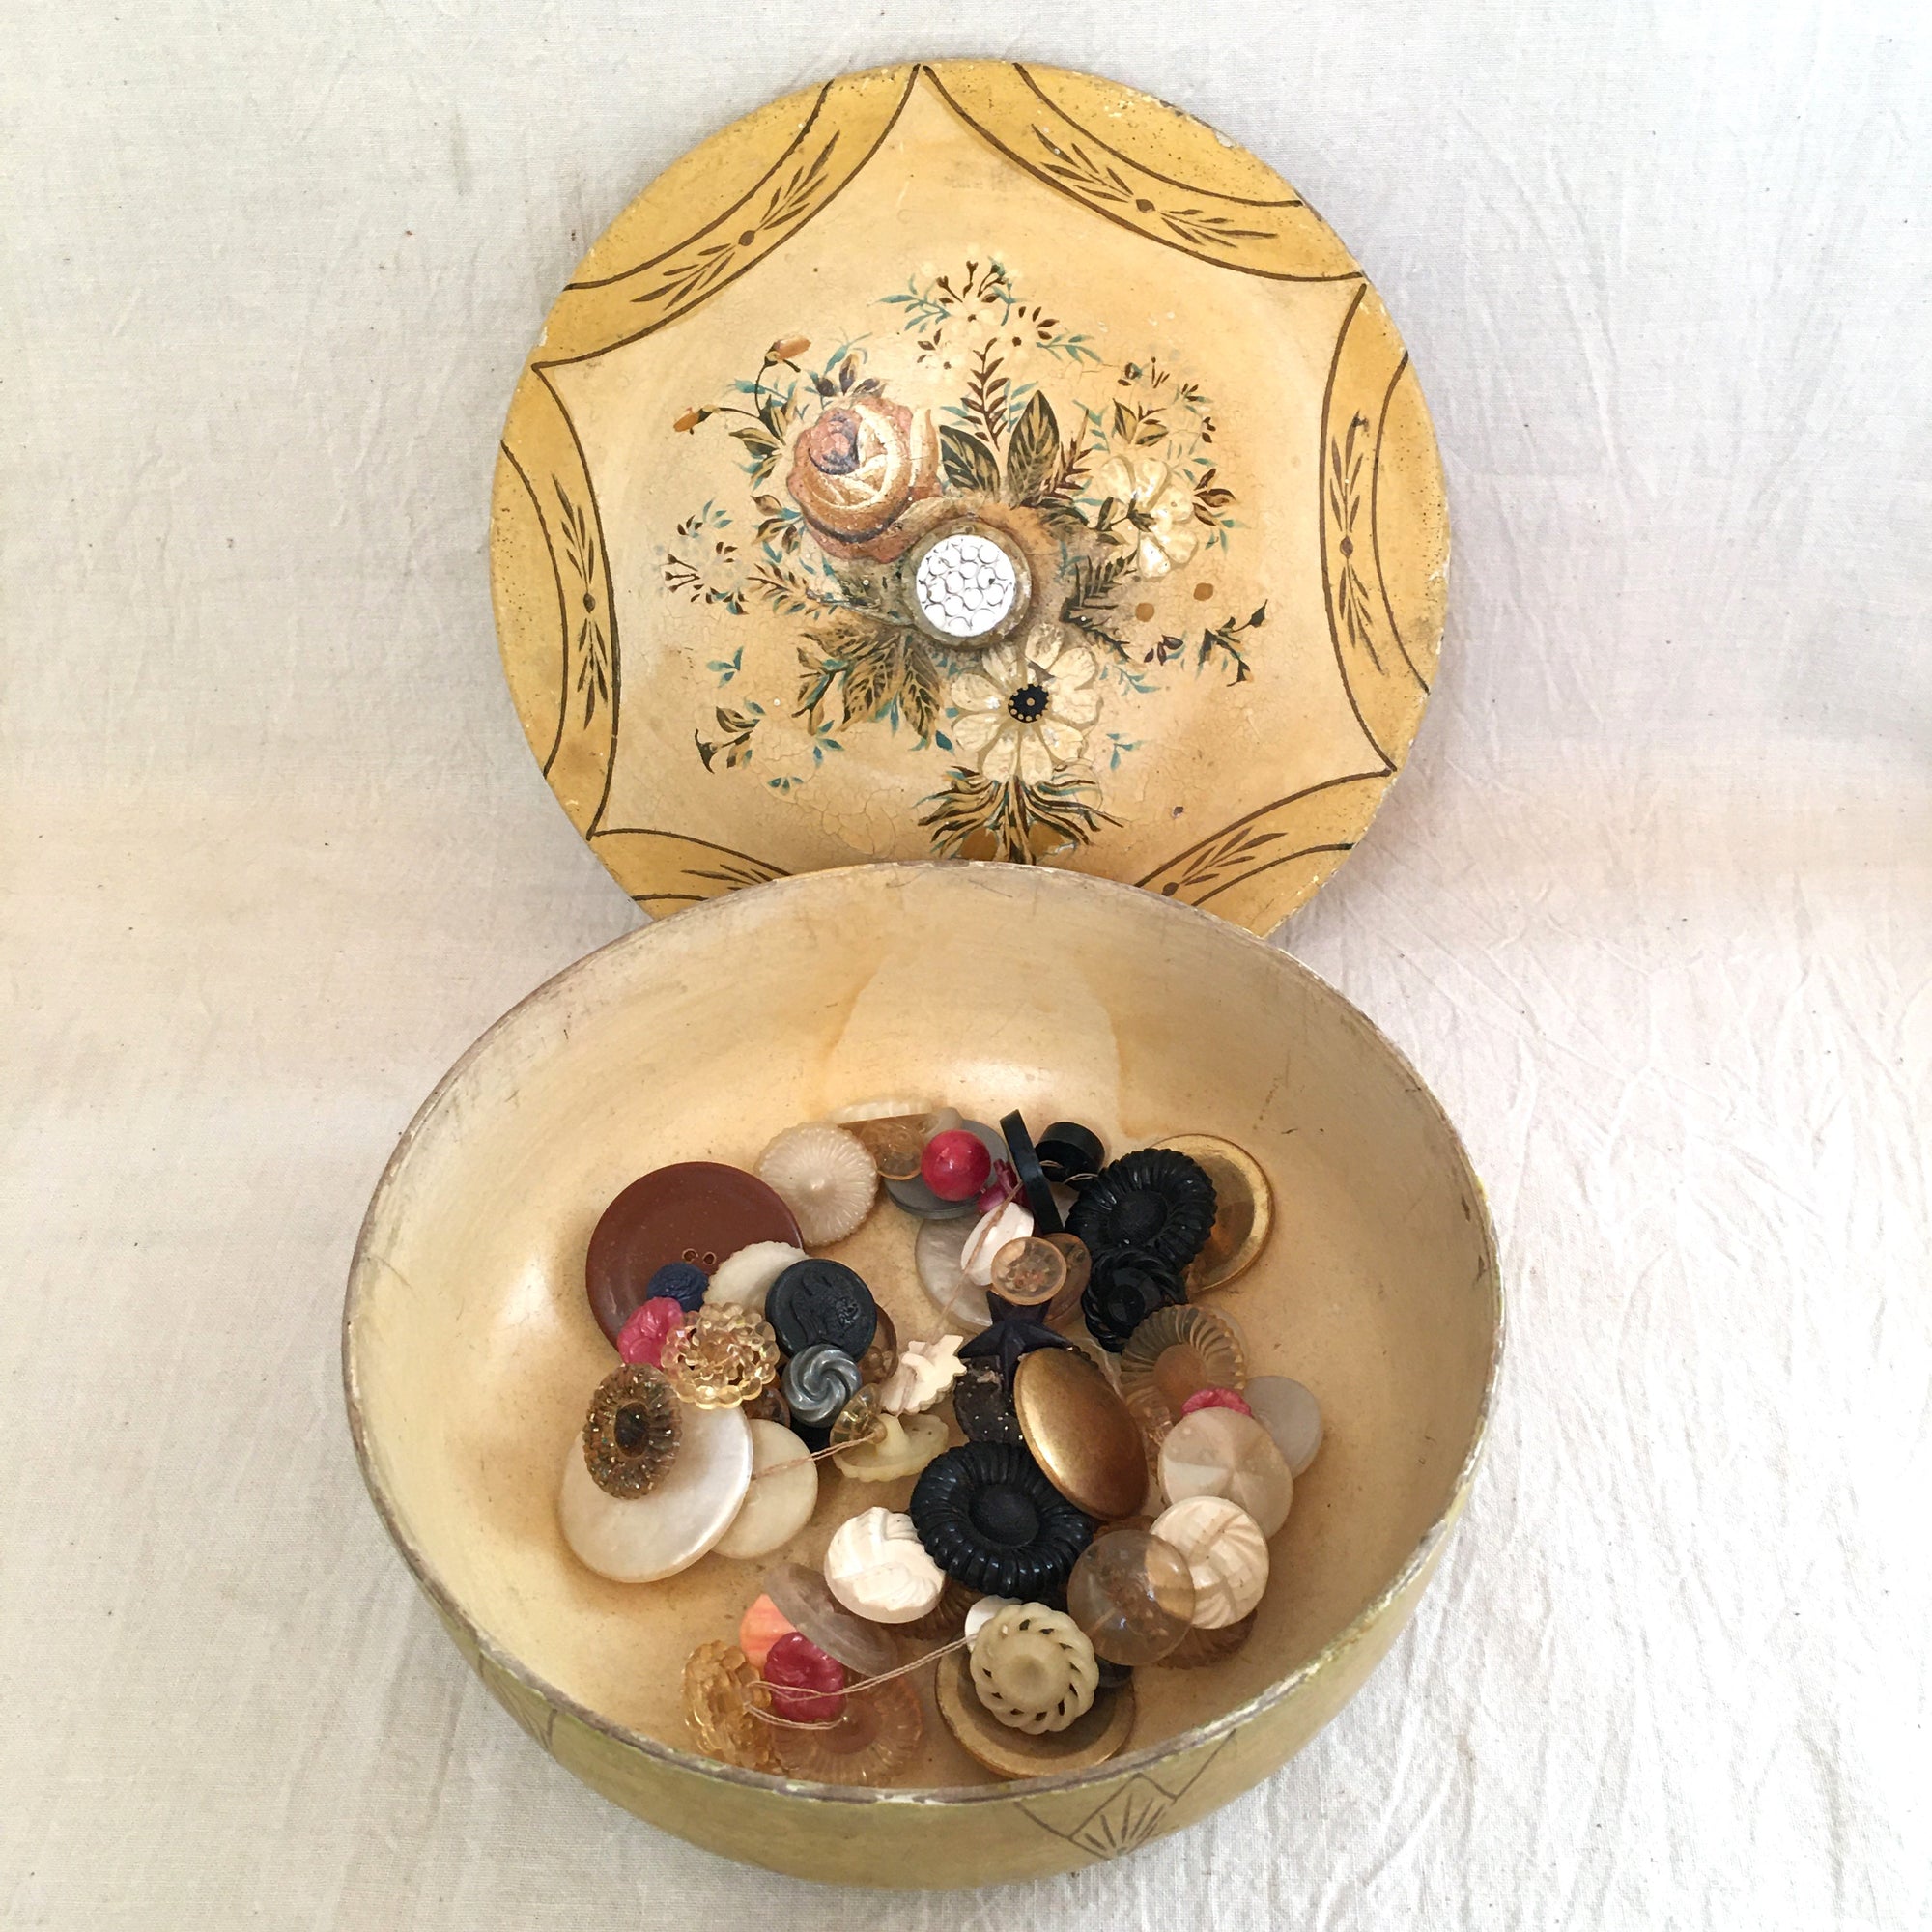 Vintage Paper Mache Bowl with Cover, Buttons Included